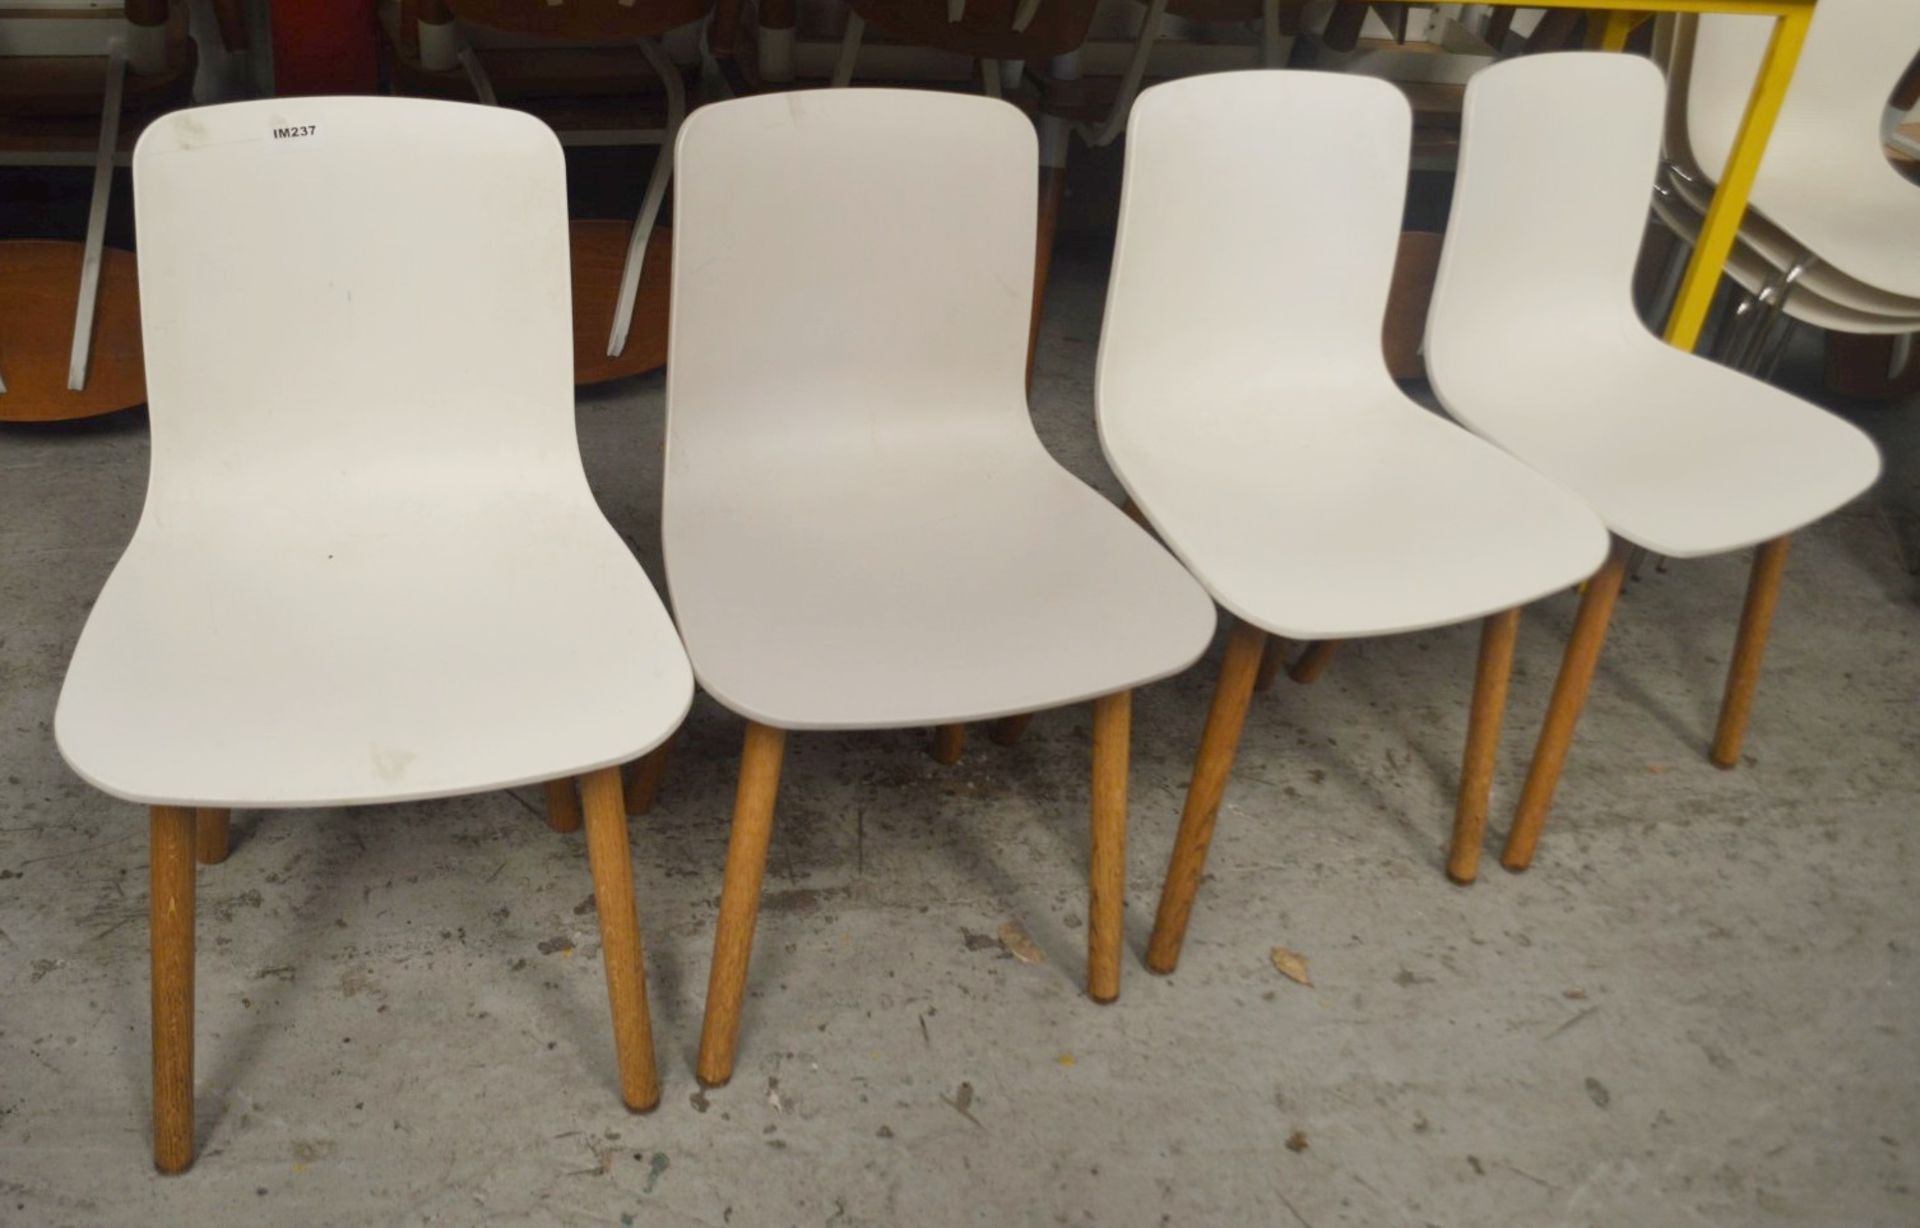 4 x VITRA 'HAL'  Chairs With Wooden Legs and White Seats - CL554 - Ref IM237 - WH3 - Location: